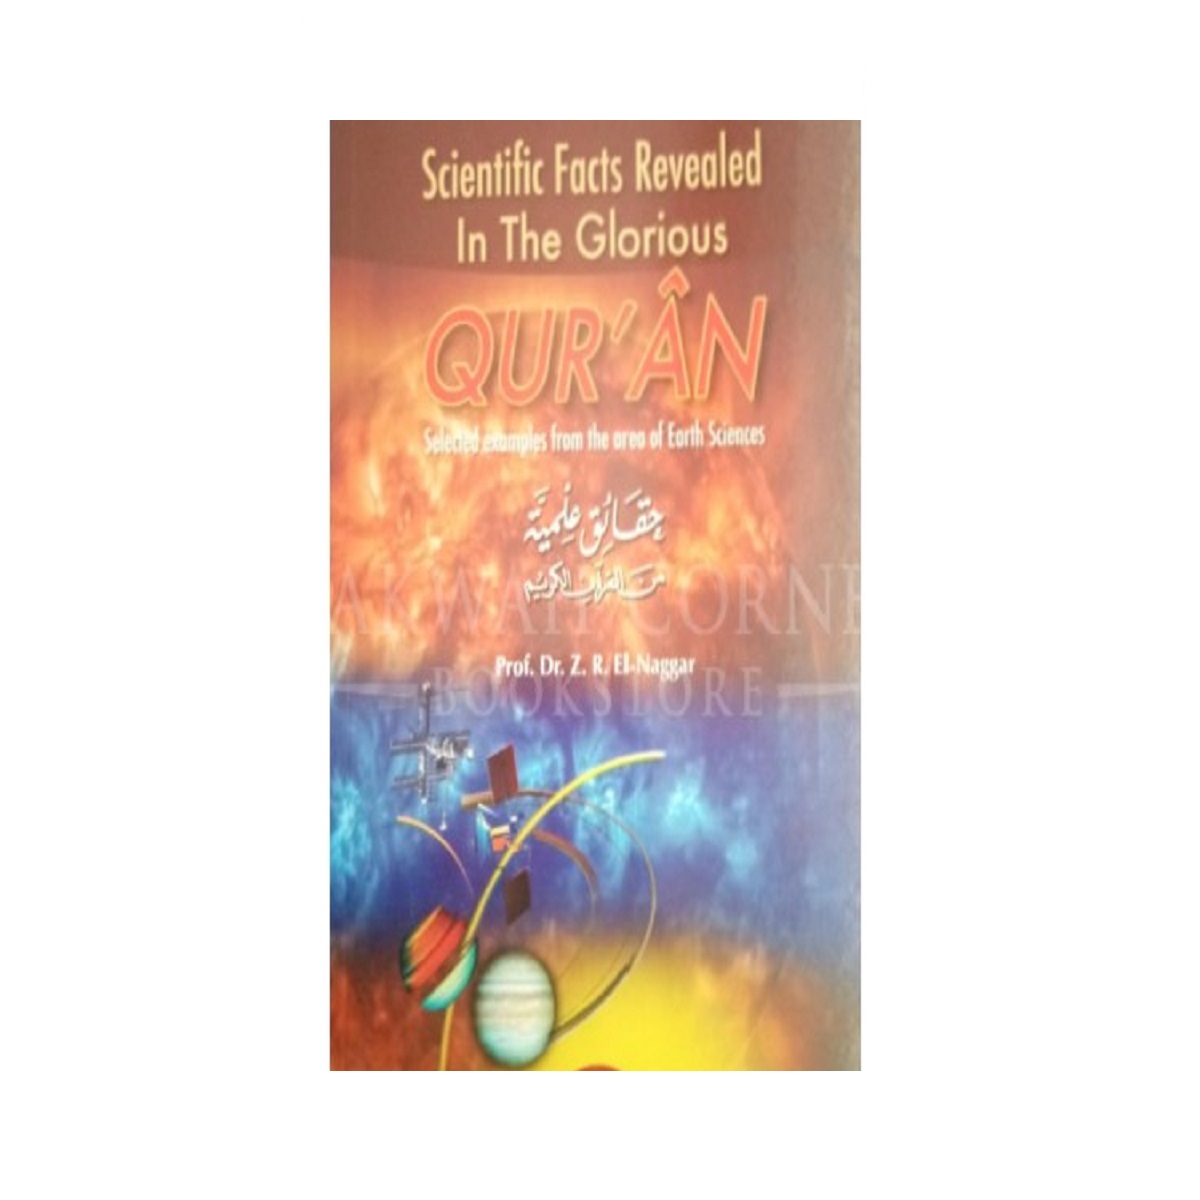 https://www.tarbiyahbooksplus.com/shop/islamic-history-and-civilization/scientific-facts-revealed-in-the-glorious-quran/